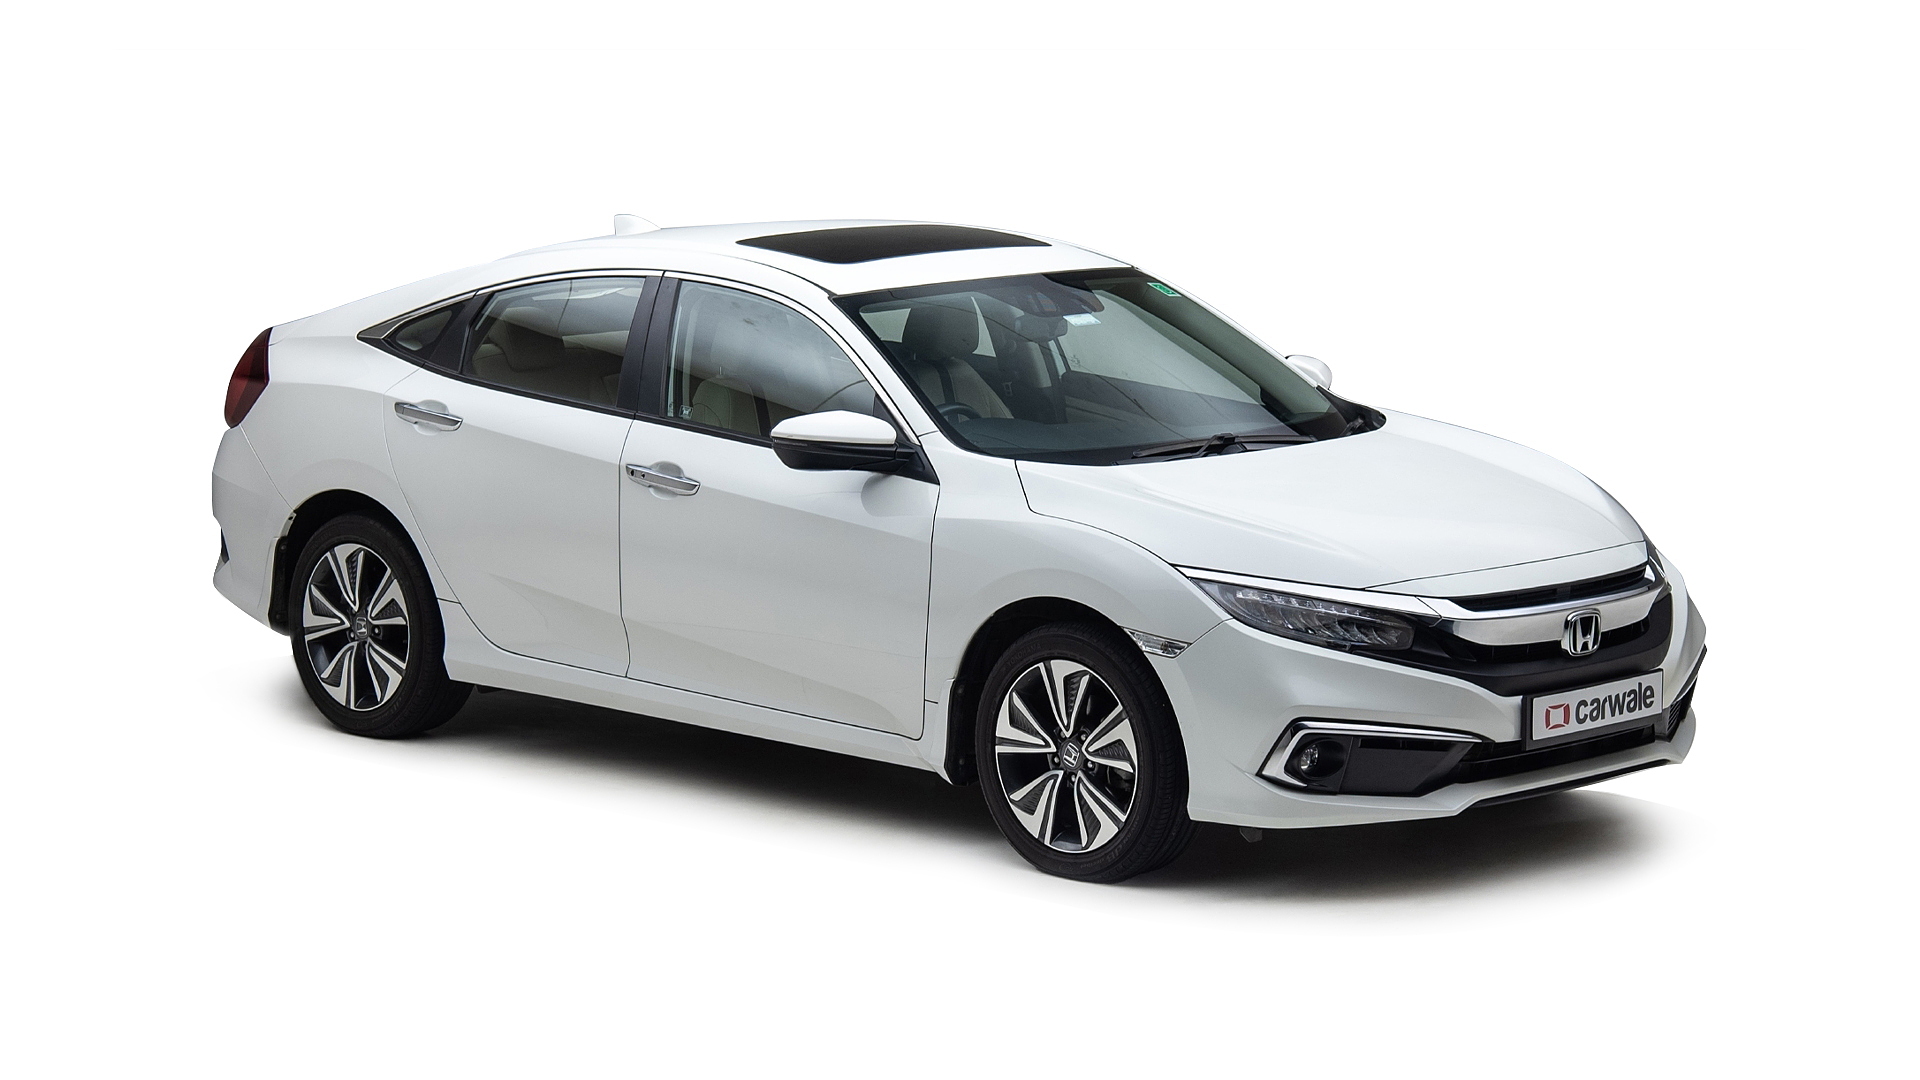 Honda Civic Zx Cvt Petrol Price In India - Features Specs And Reviews - Carwale